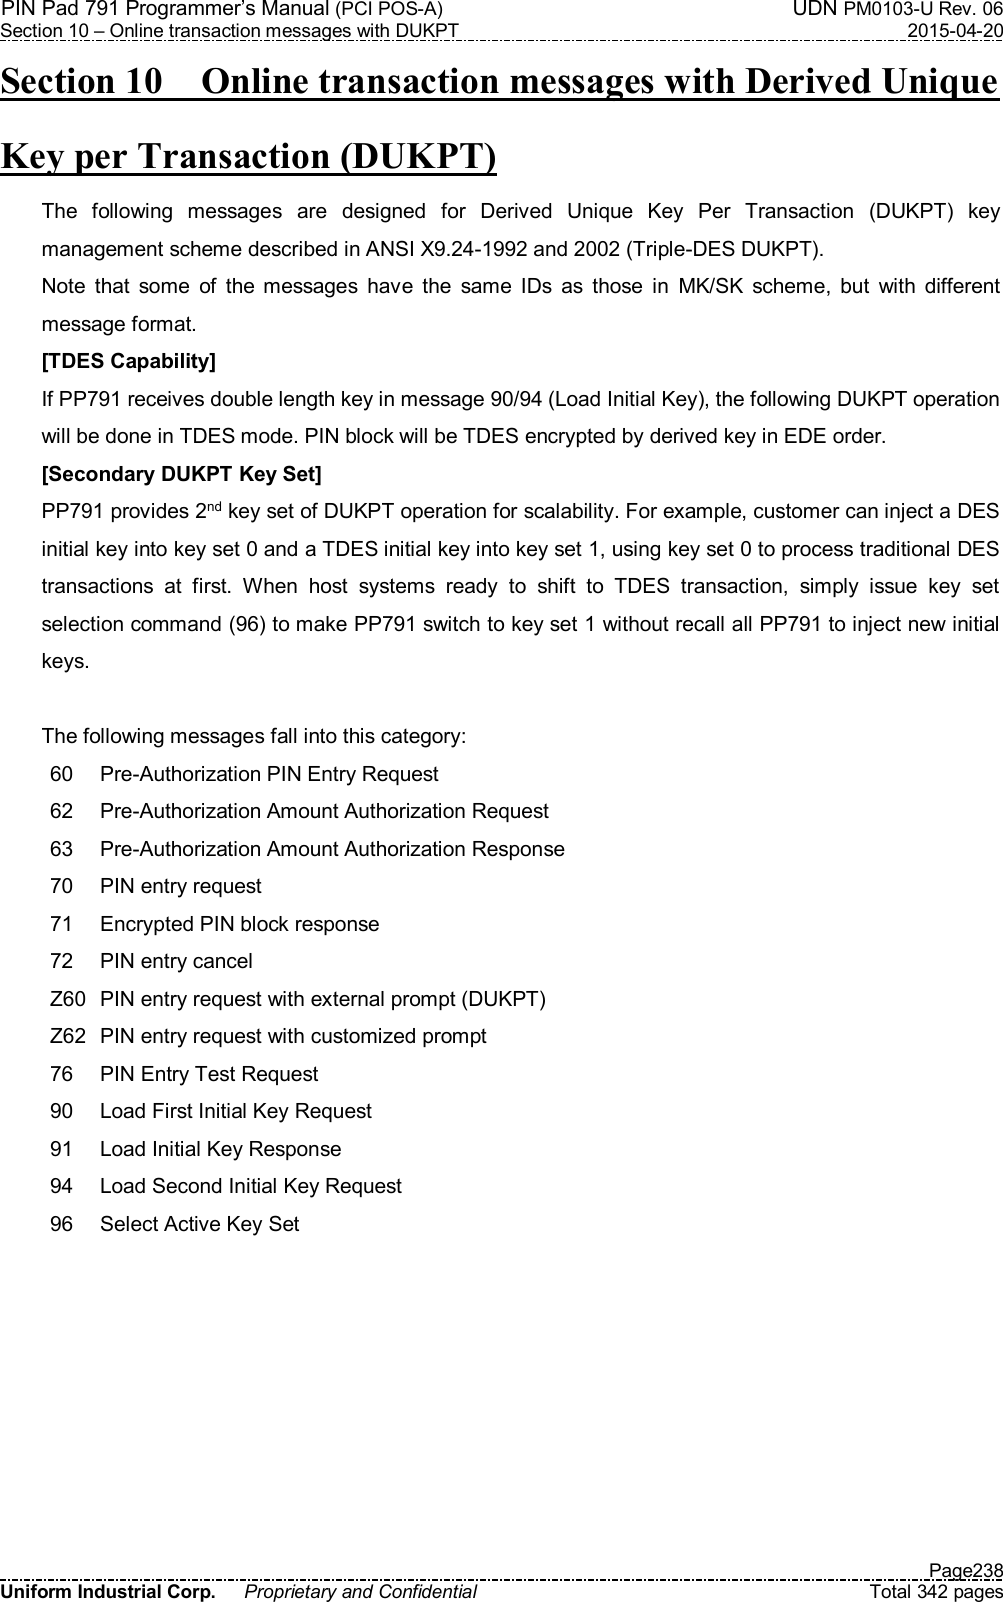 PIN Pad 791 Programmer’s Manual (PCI POS-A)  UDN PM0103-U Rev. 06 Section 10 – Online transaction messages with DUKPT  2015-04-20   Page238 Uniform Industrial Corp.  Proprietary and Confidential  Total 342 pages Section 10    Online transaction messages with Derived Unique Key per Transaction (DUKPT) The  following  messages  are  designed  for  Derived  Unique  Key  Per  Transaction  (DUKPT)  key management scheme described in ANSI X9.24-1992 and 2002 (Triple-DES DUKPT).   Note  that  some  of  the  messages  have  the  same  IDs  as  those  in  MK/SK  scheme,  but  with  different message format. [TDES Capability] If PP791 receives double length key in message 90/94 (Load Initial Key), the following DUKPT operation will be done in TDES mode. PIN block will be TDES encrypted by derived key in EDE order. [Secondary DUKPT Key Set] PP791 provides 2nd key set of DUKPT operation for scalability. For example, customer can inject a DES initial key into key set 0 and a TDES initial key into key set 1, using key set 0 to process traditional DES transactions  at  first.  When  host  systems  ready  to  shift  to  TDES  transaction,  simply  issue  key  set selection command (96) to make PP791 switch to key set 1 without recall all PP791 to inject new initial keys.    The following messages fall into this category:   60  Pre-Authorization PIN Entry Request   62  Pre-Authorization Amount Authorization Request   63  Pre-Authorization Amount Authorization Response   70  PIN entry request   71  Encrypted PIN block response   72  PIN entry cancel   Z60  PIN entry request with external prompt (DUKPT)   Z62  PIN entry request with customized prompt   76  PIN Entry Test Request   90  Load First Initial Key Request   91  Load Initial Key Response   94  Load Second Initial Key Request   96  Select Active Key Set     